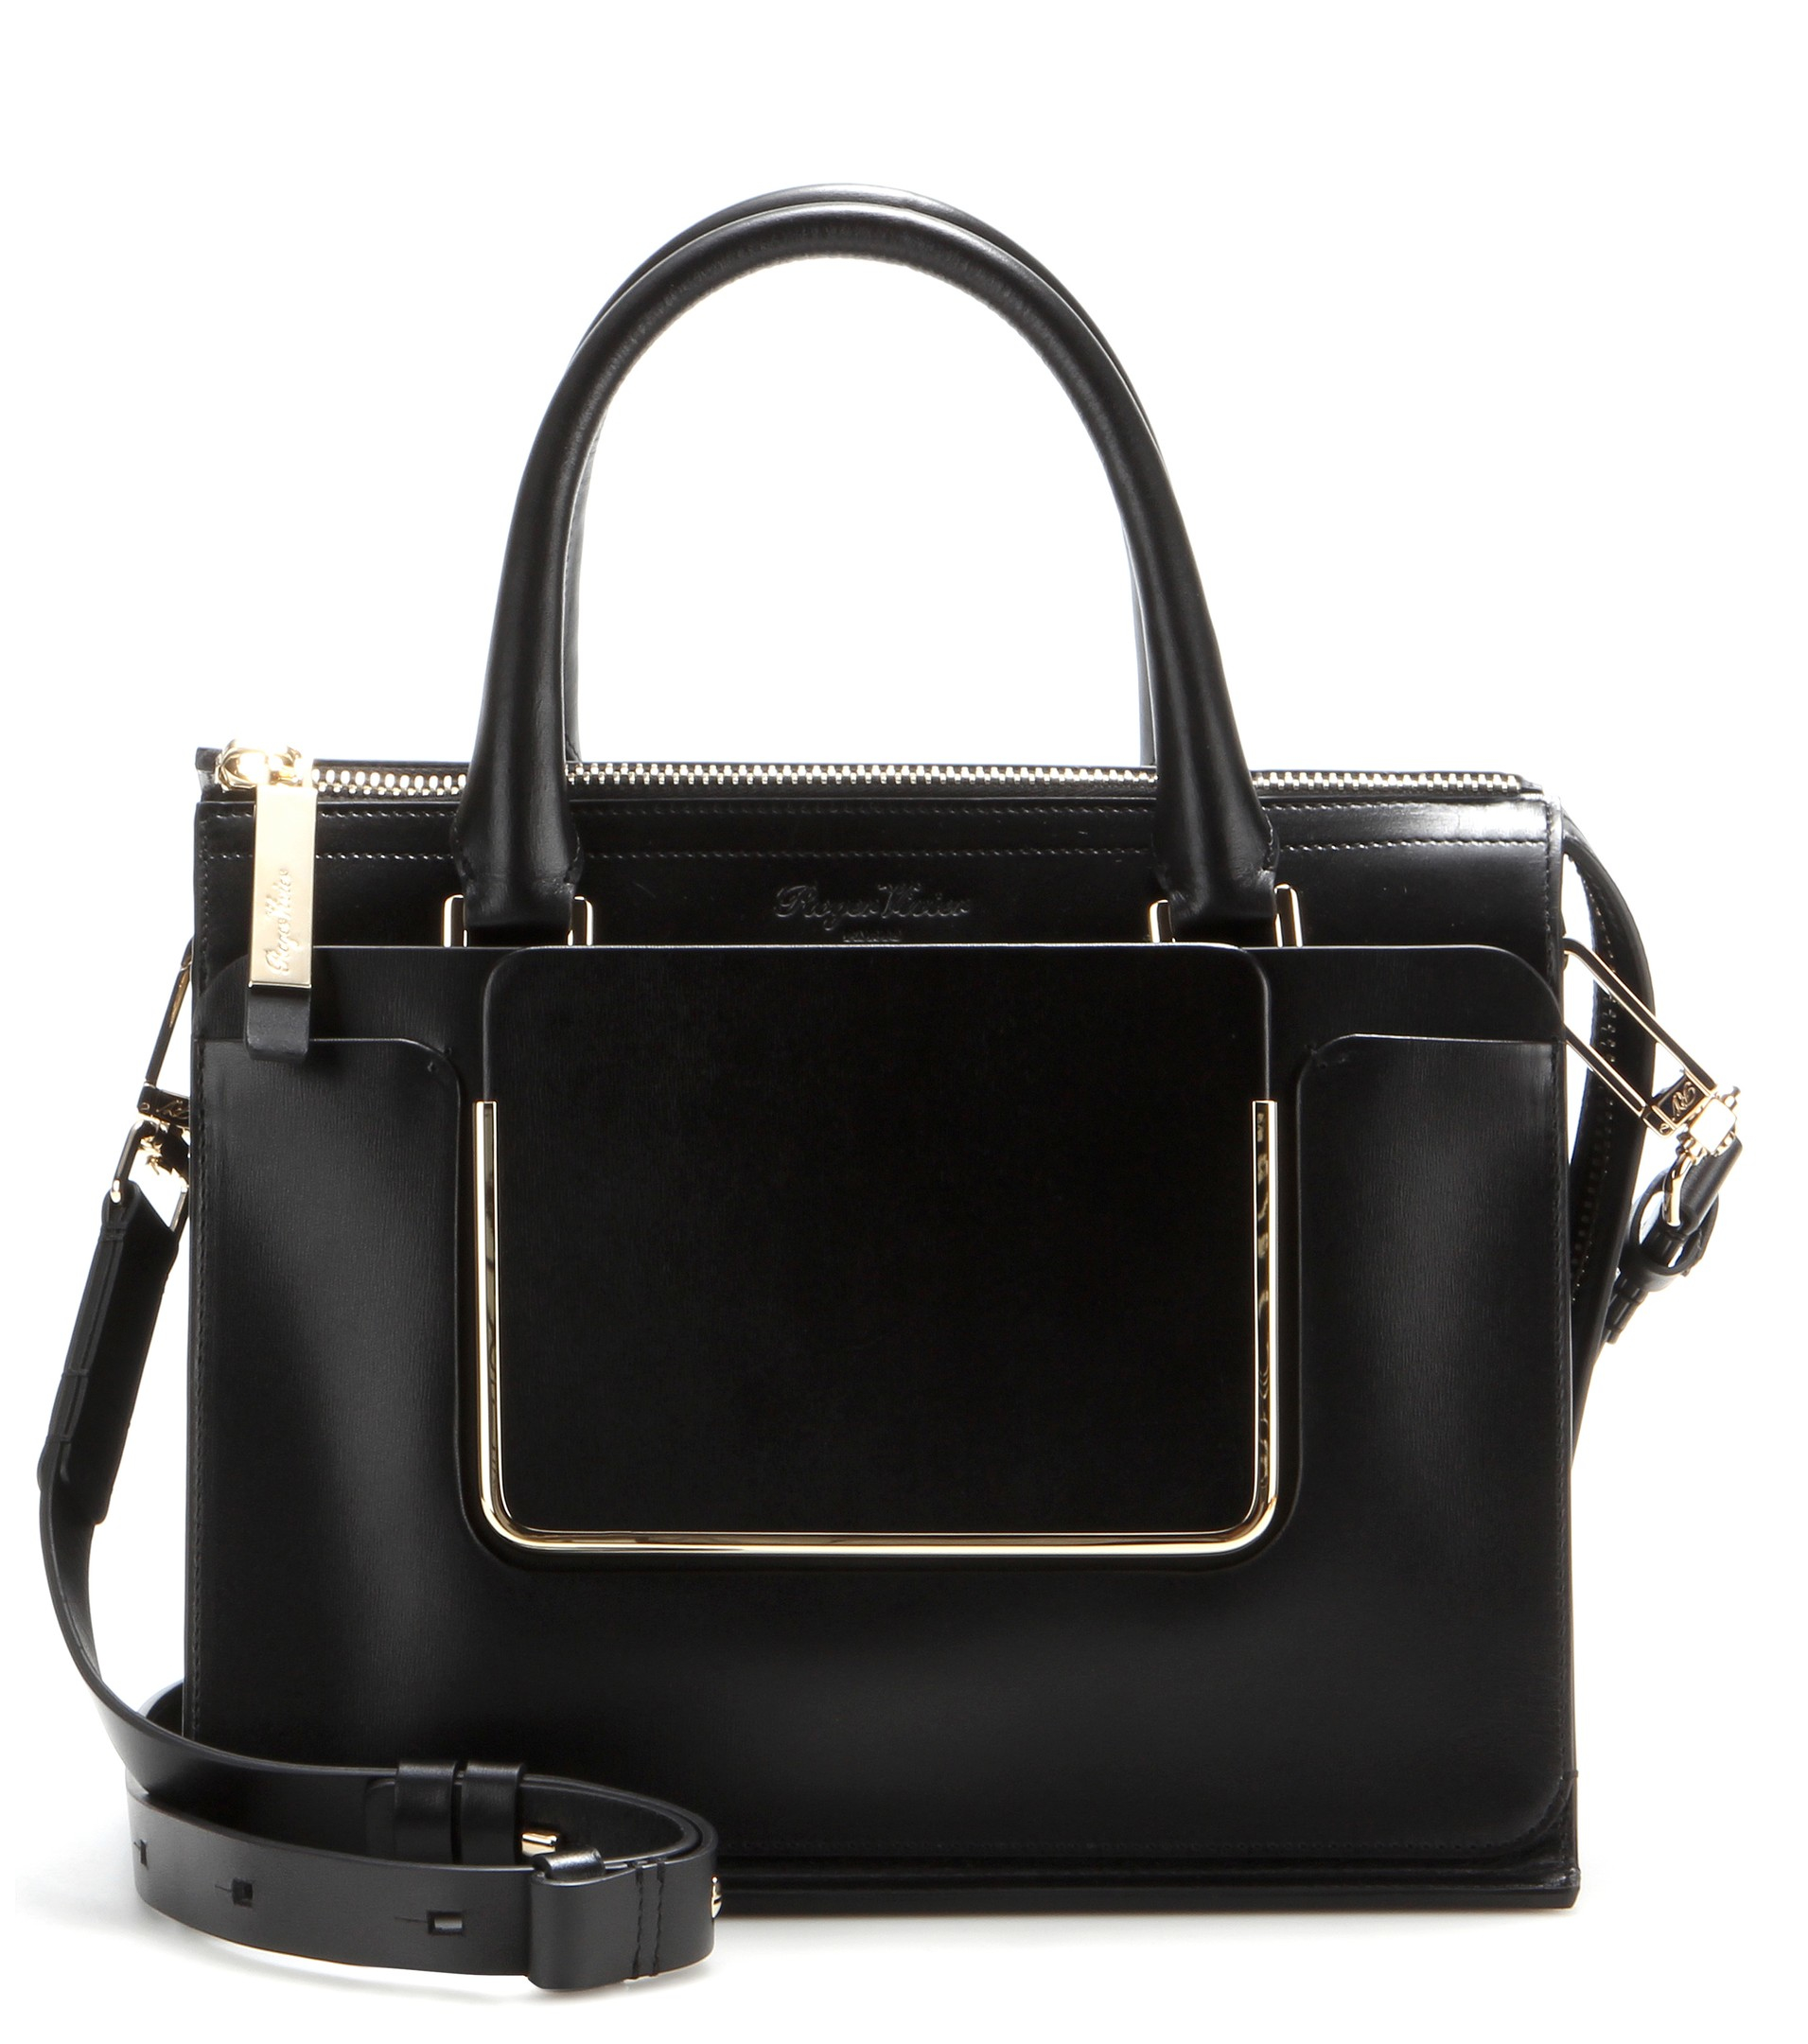 Roger Vivier Shopping U Small Leather Tote in Black - Lyst